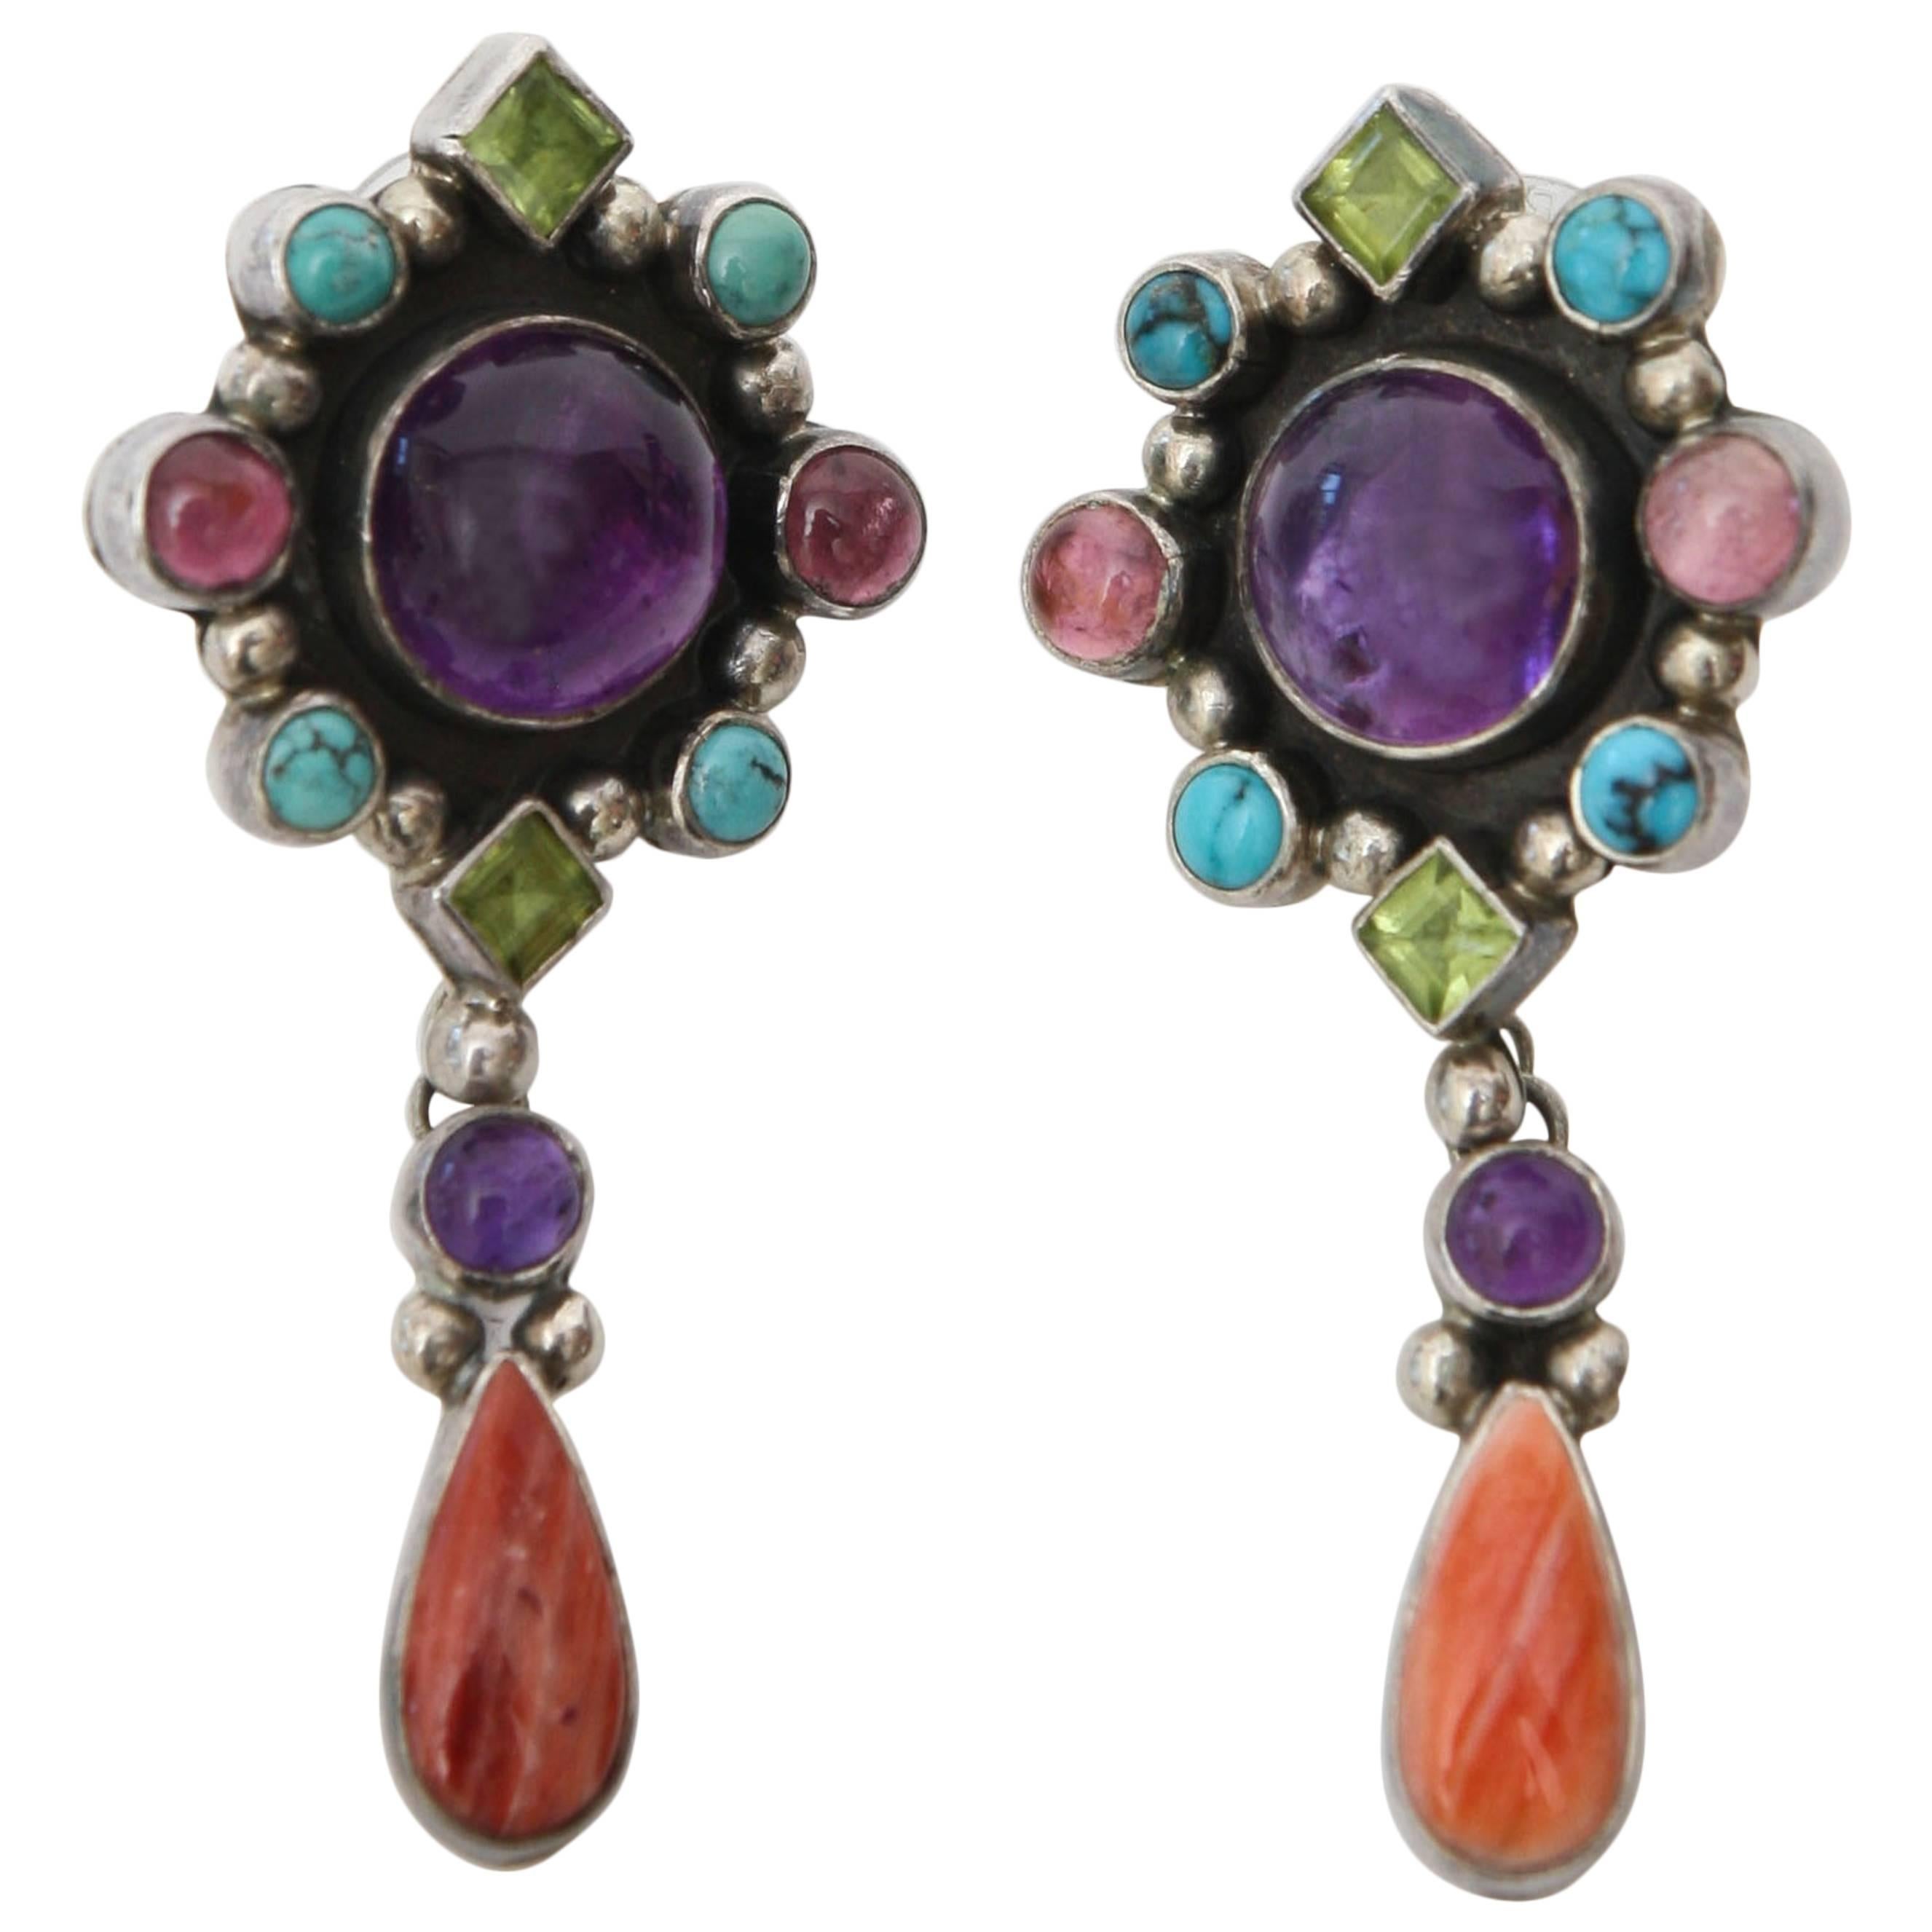 Pair of Coral, Amethyst, Turquoise, Citrine and Sterling Silver Earrings